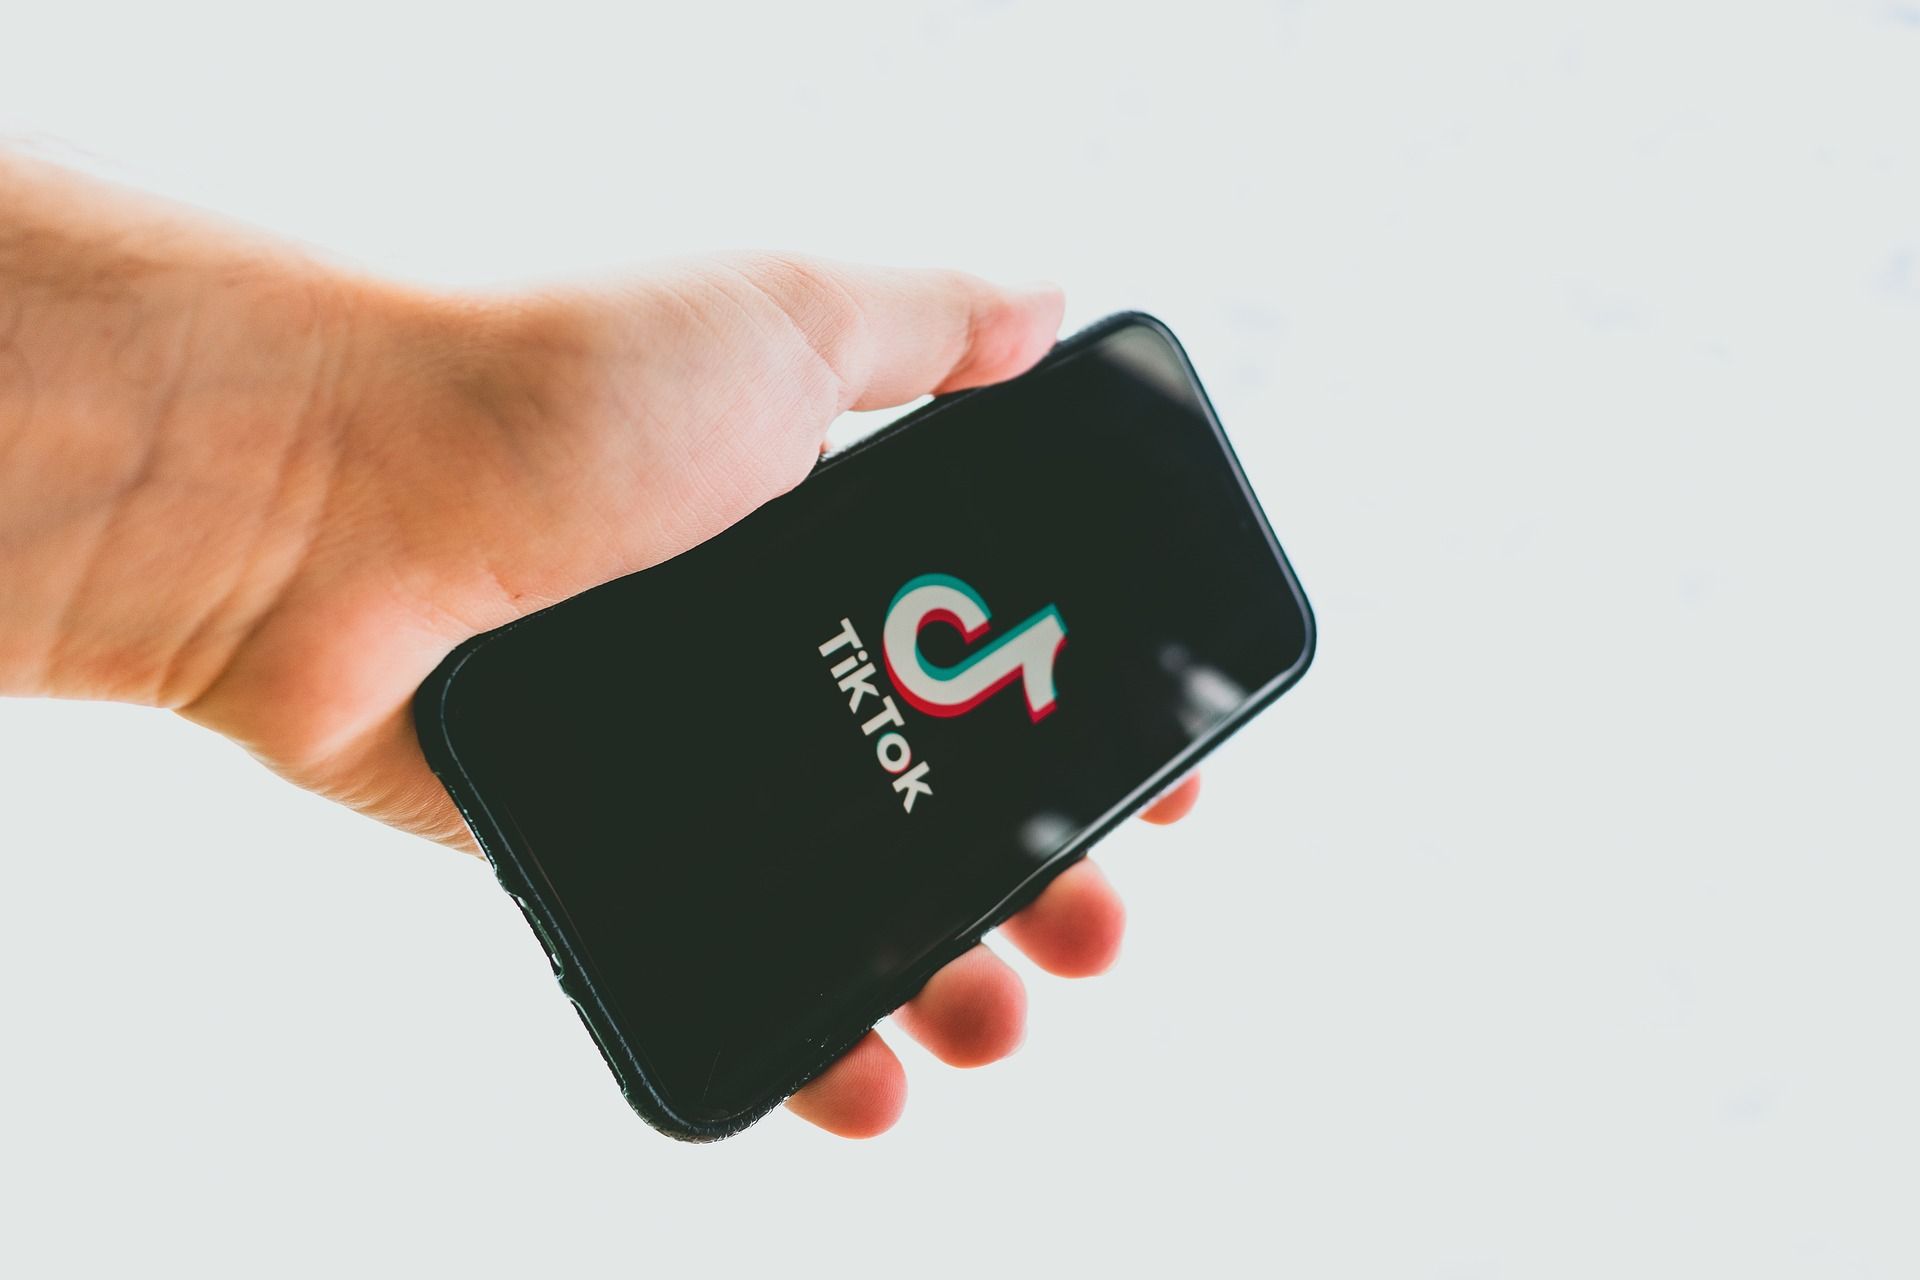 TikTok Youth Council: 世界中の 15 人の十代の若者たちが意思決定を行う